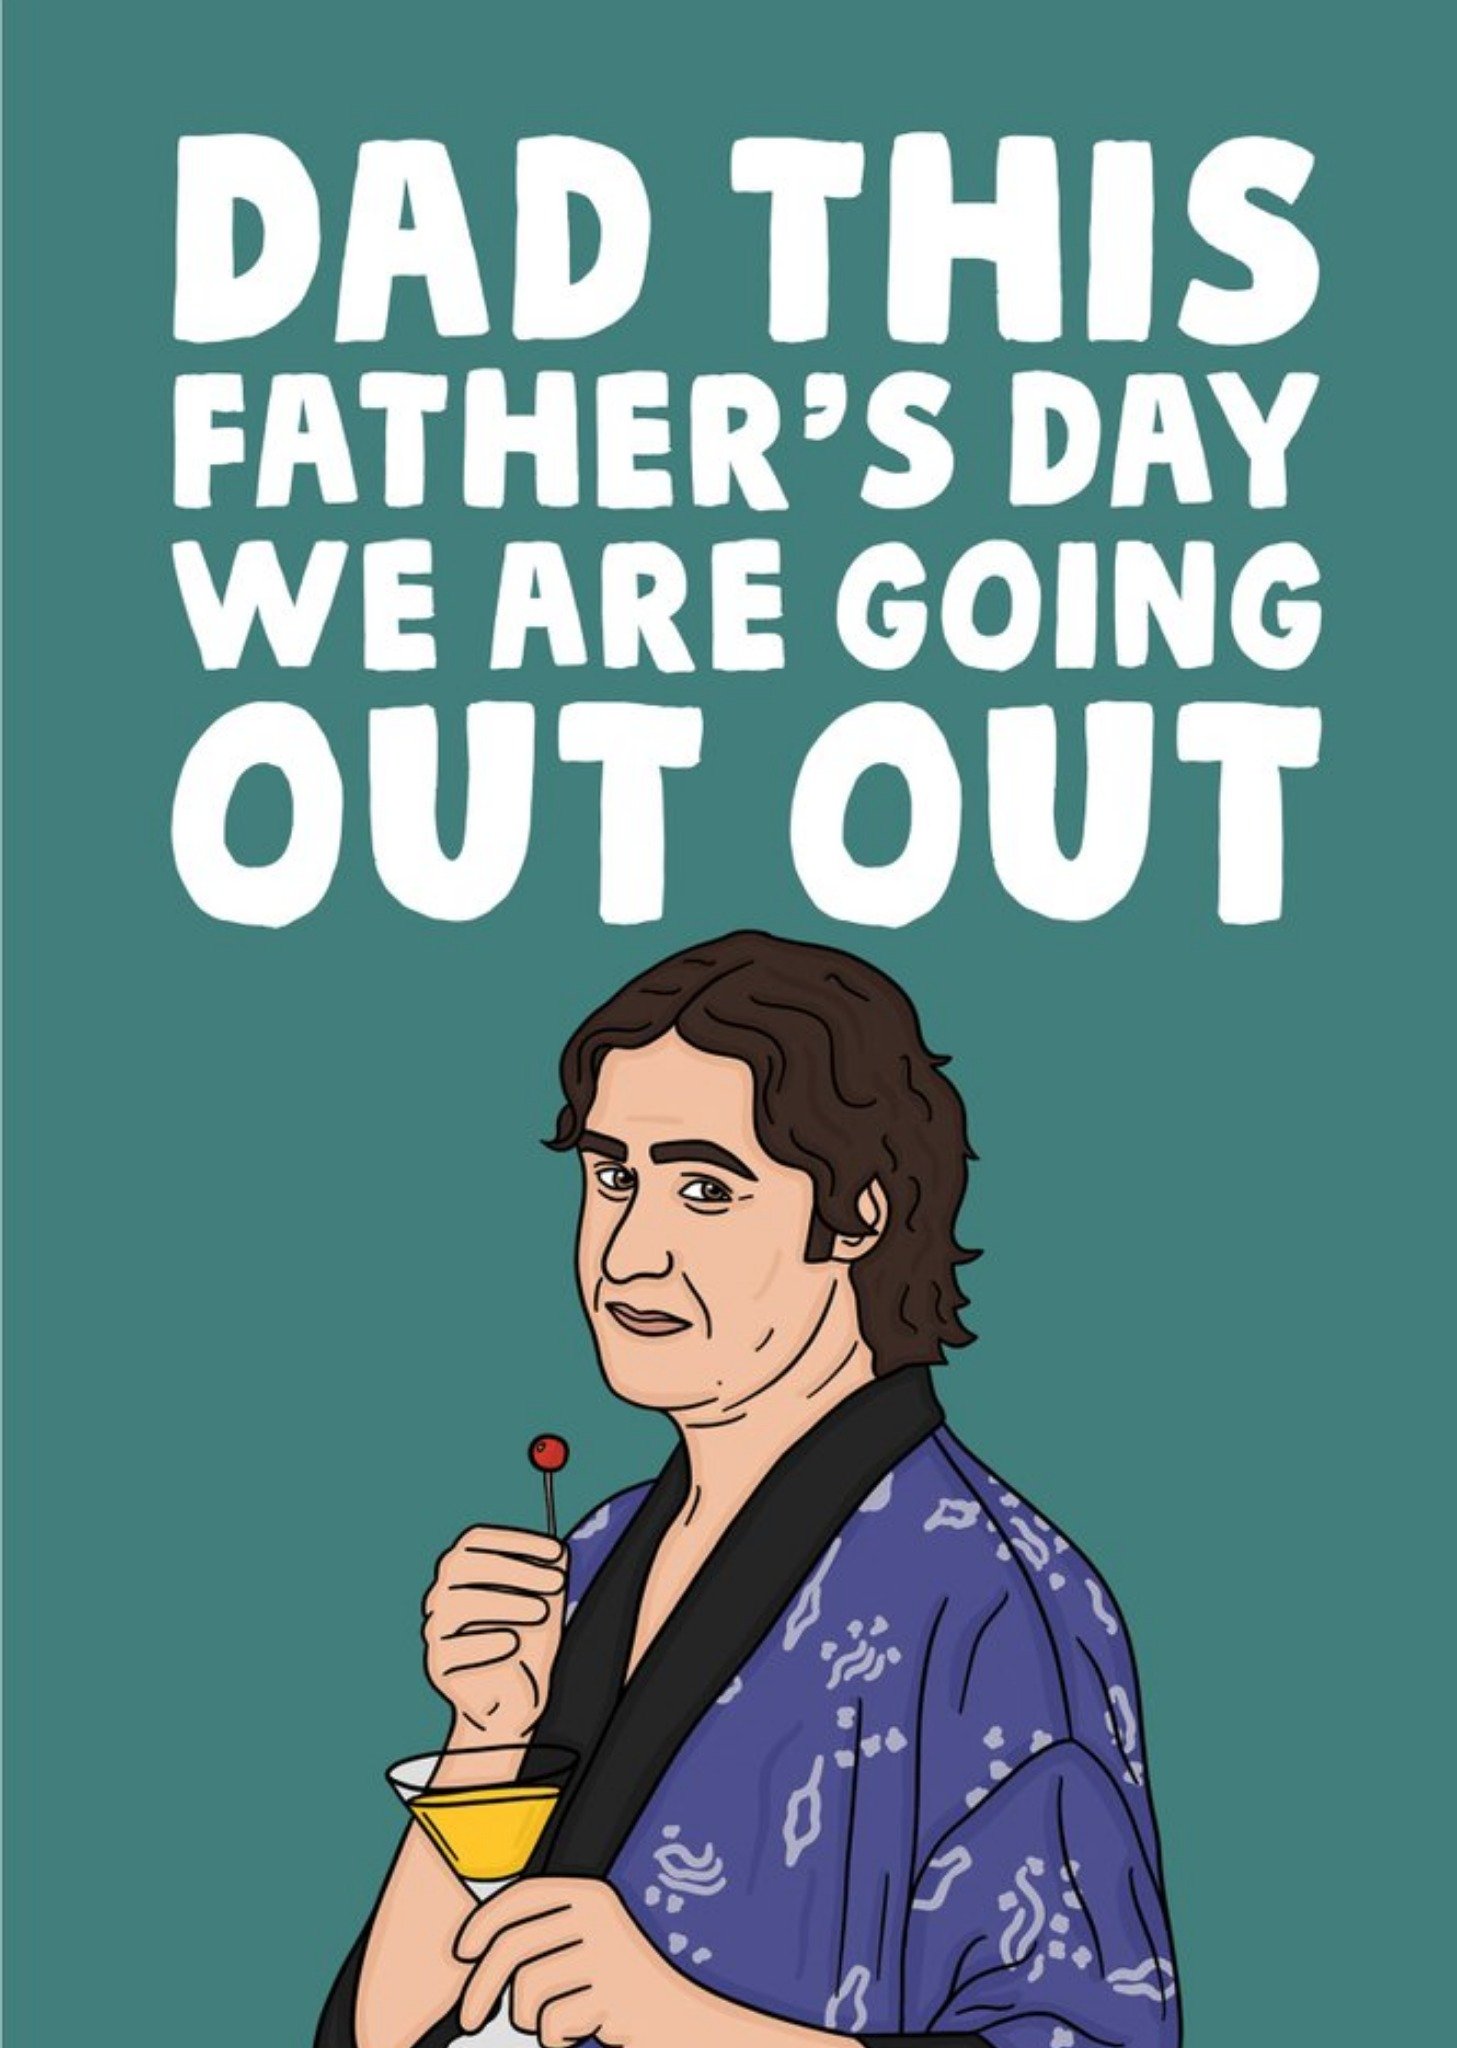 Moonpig Funny Illustrated Dad This Fathers Day We Are Going Out Out Card Ecard